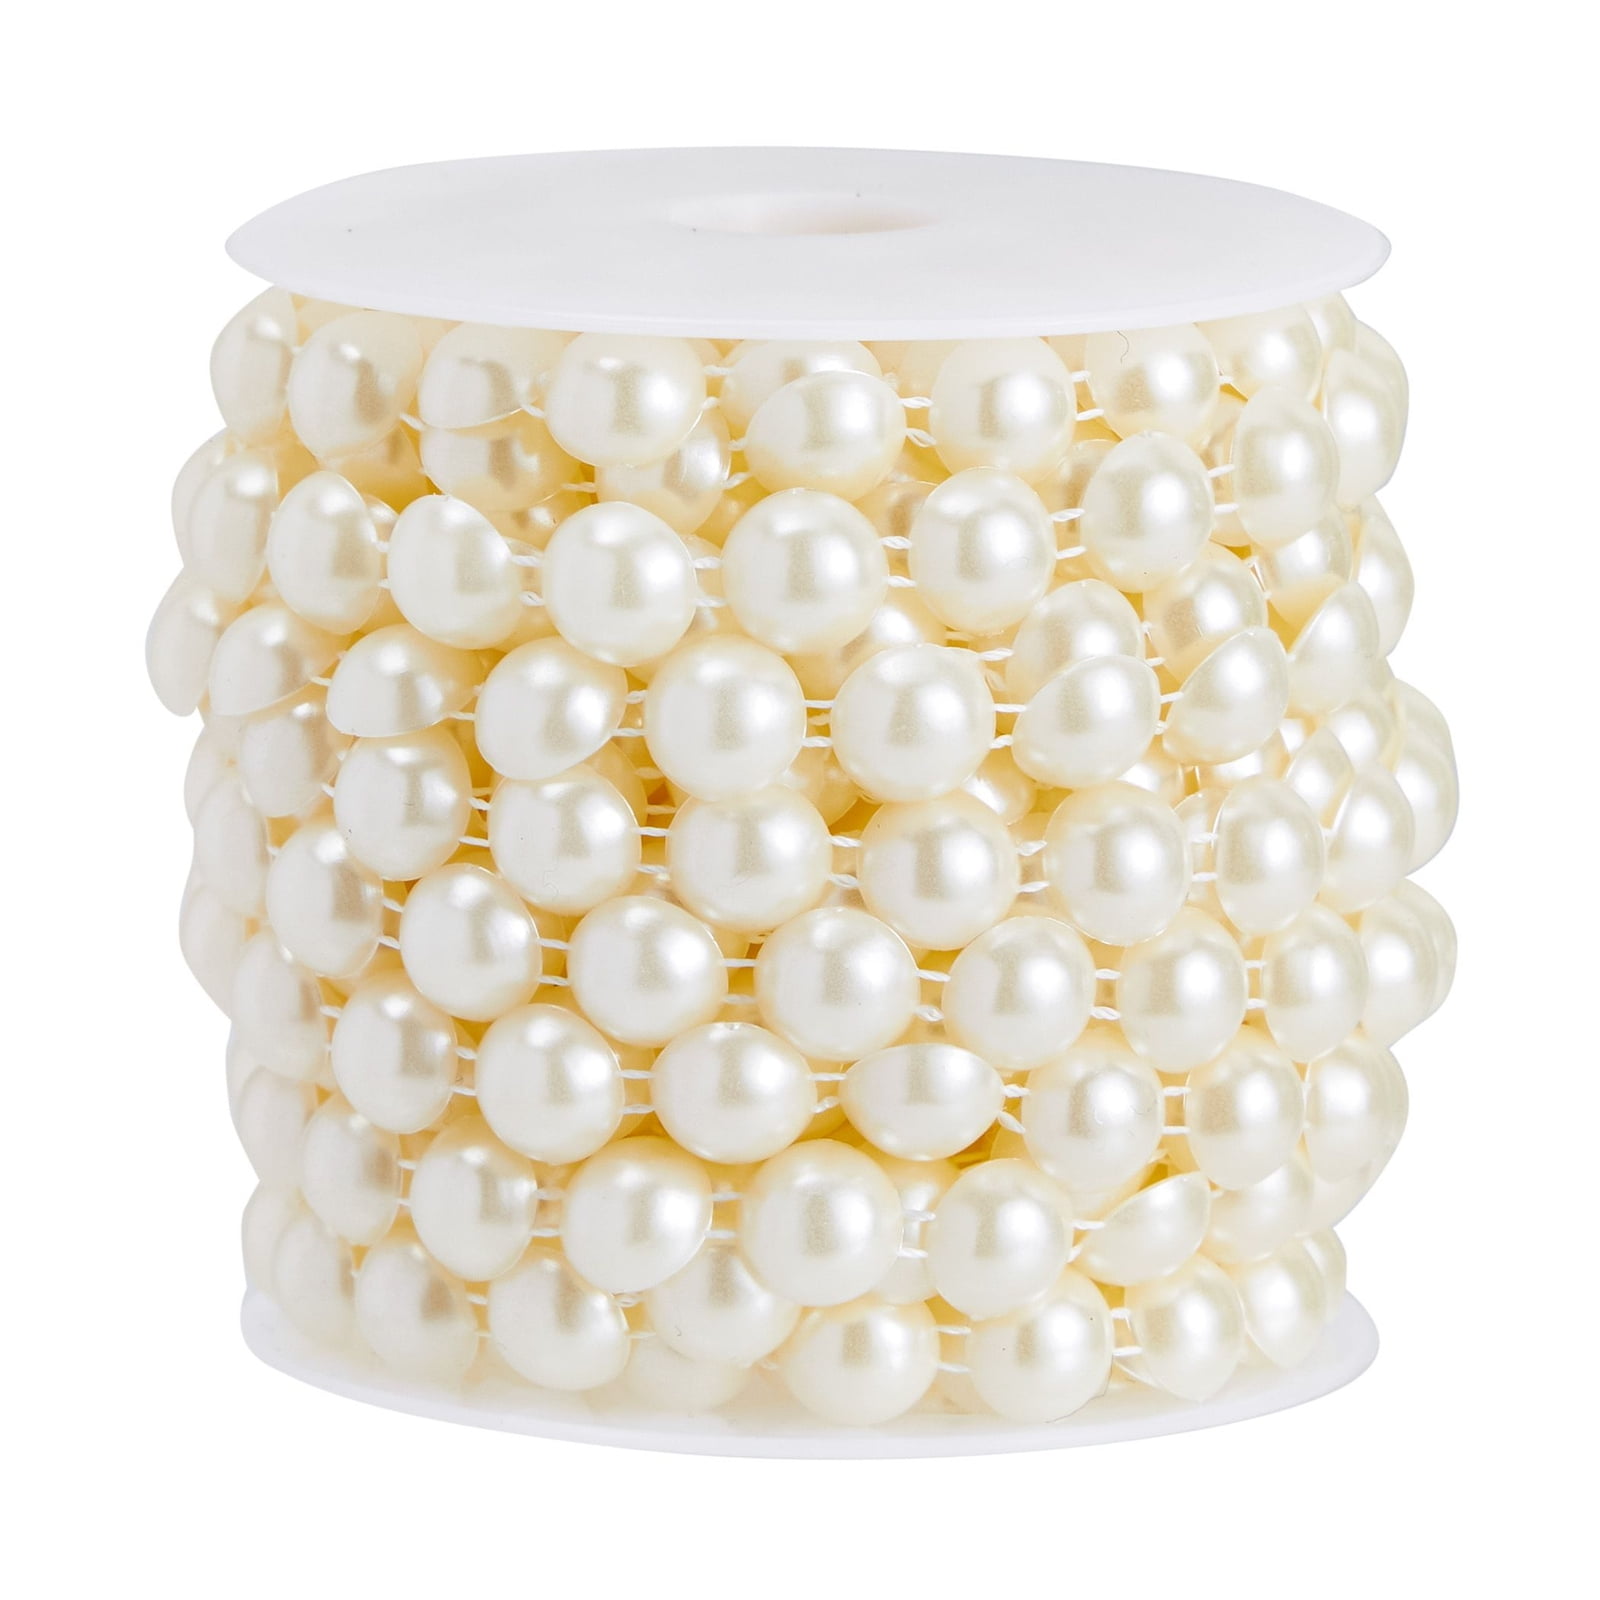 Floral Garden White Pearls 10mm Round Craft Beads 100 Count NEW